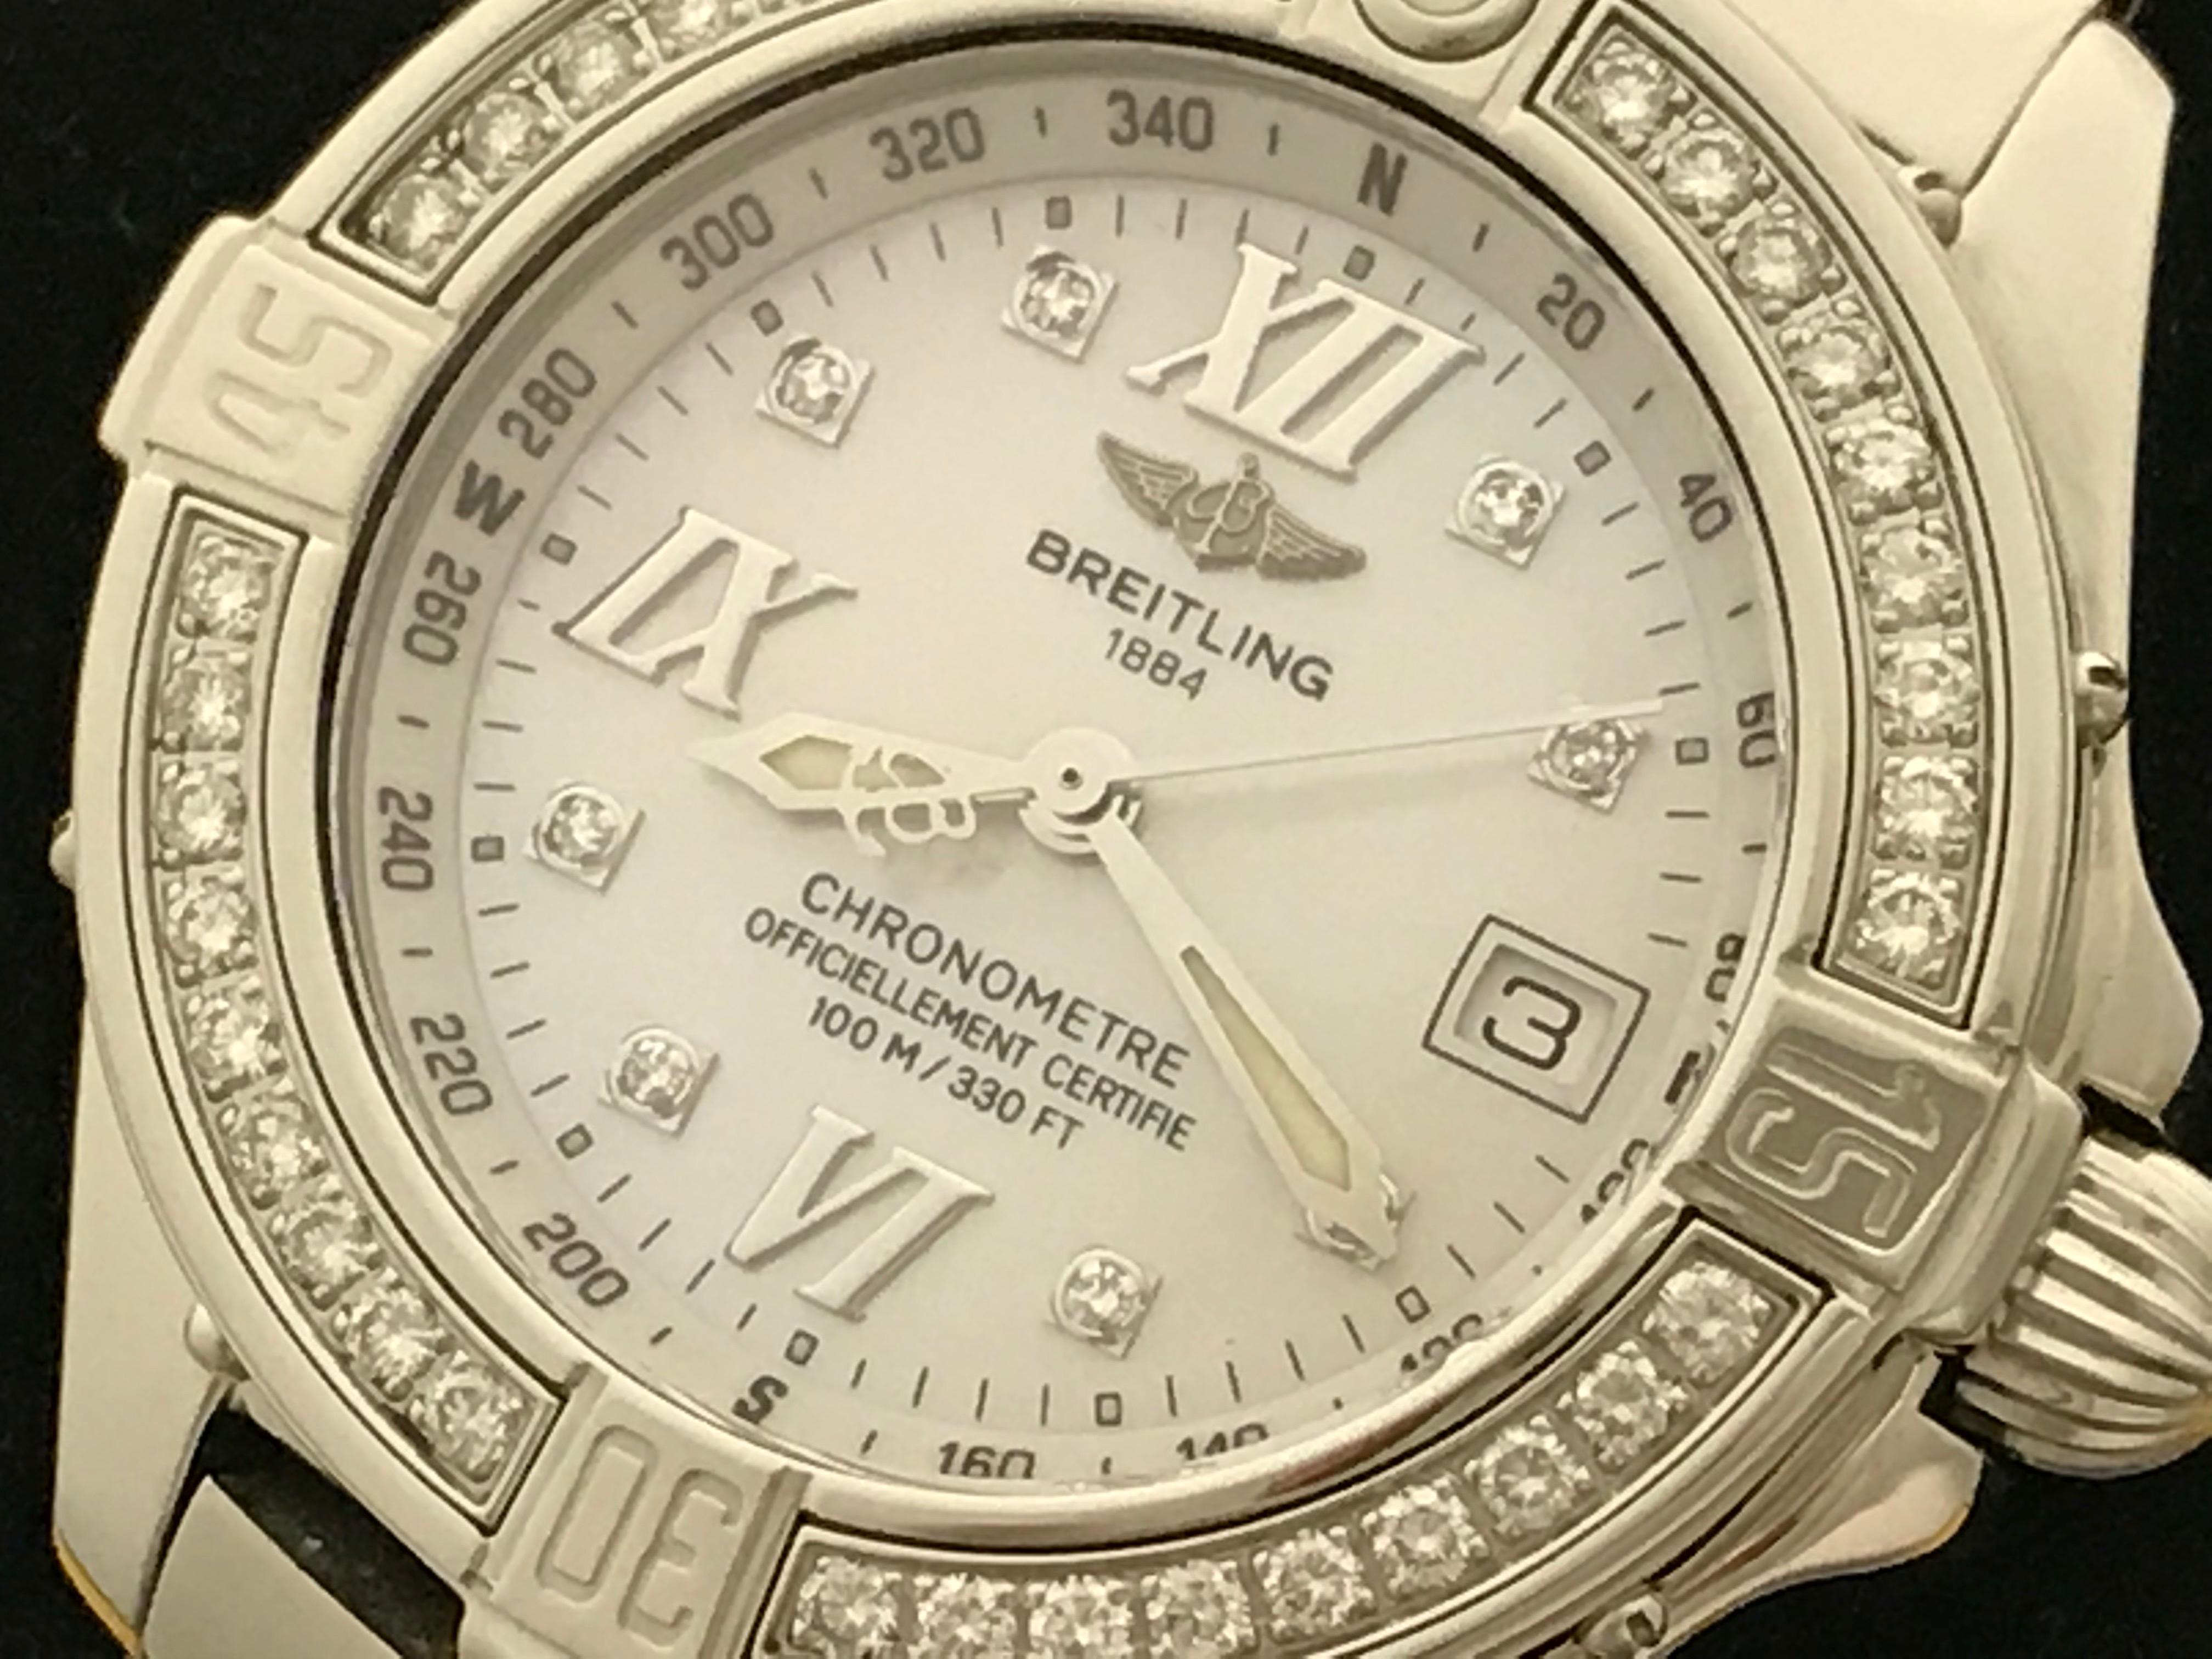 Breitling Cockpit Lady pre-owed quartz wrist watch with date. Model A67365. Breitling Mother of Pearl Dial with Diamond hour markers and Roman numerals, Stainless Steel case with rotatable diamond bezel (31mm dia.) Stainless Steel Breitling Lady